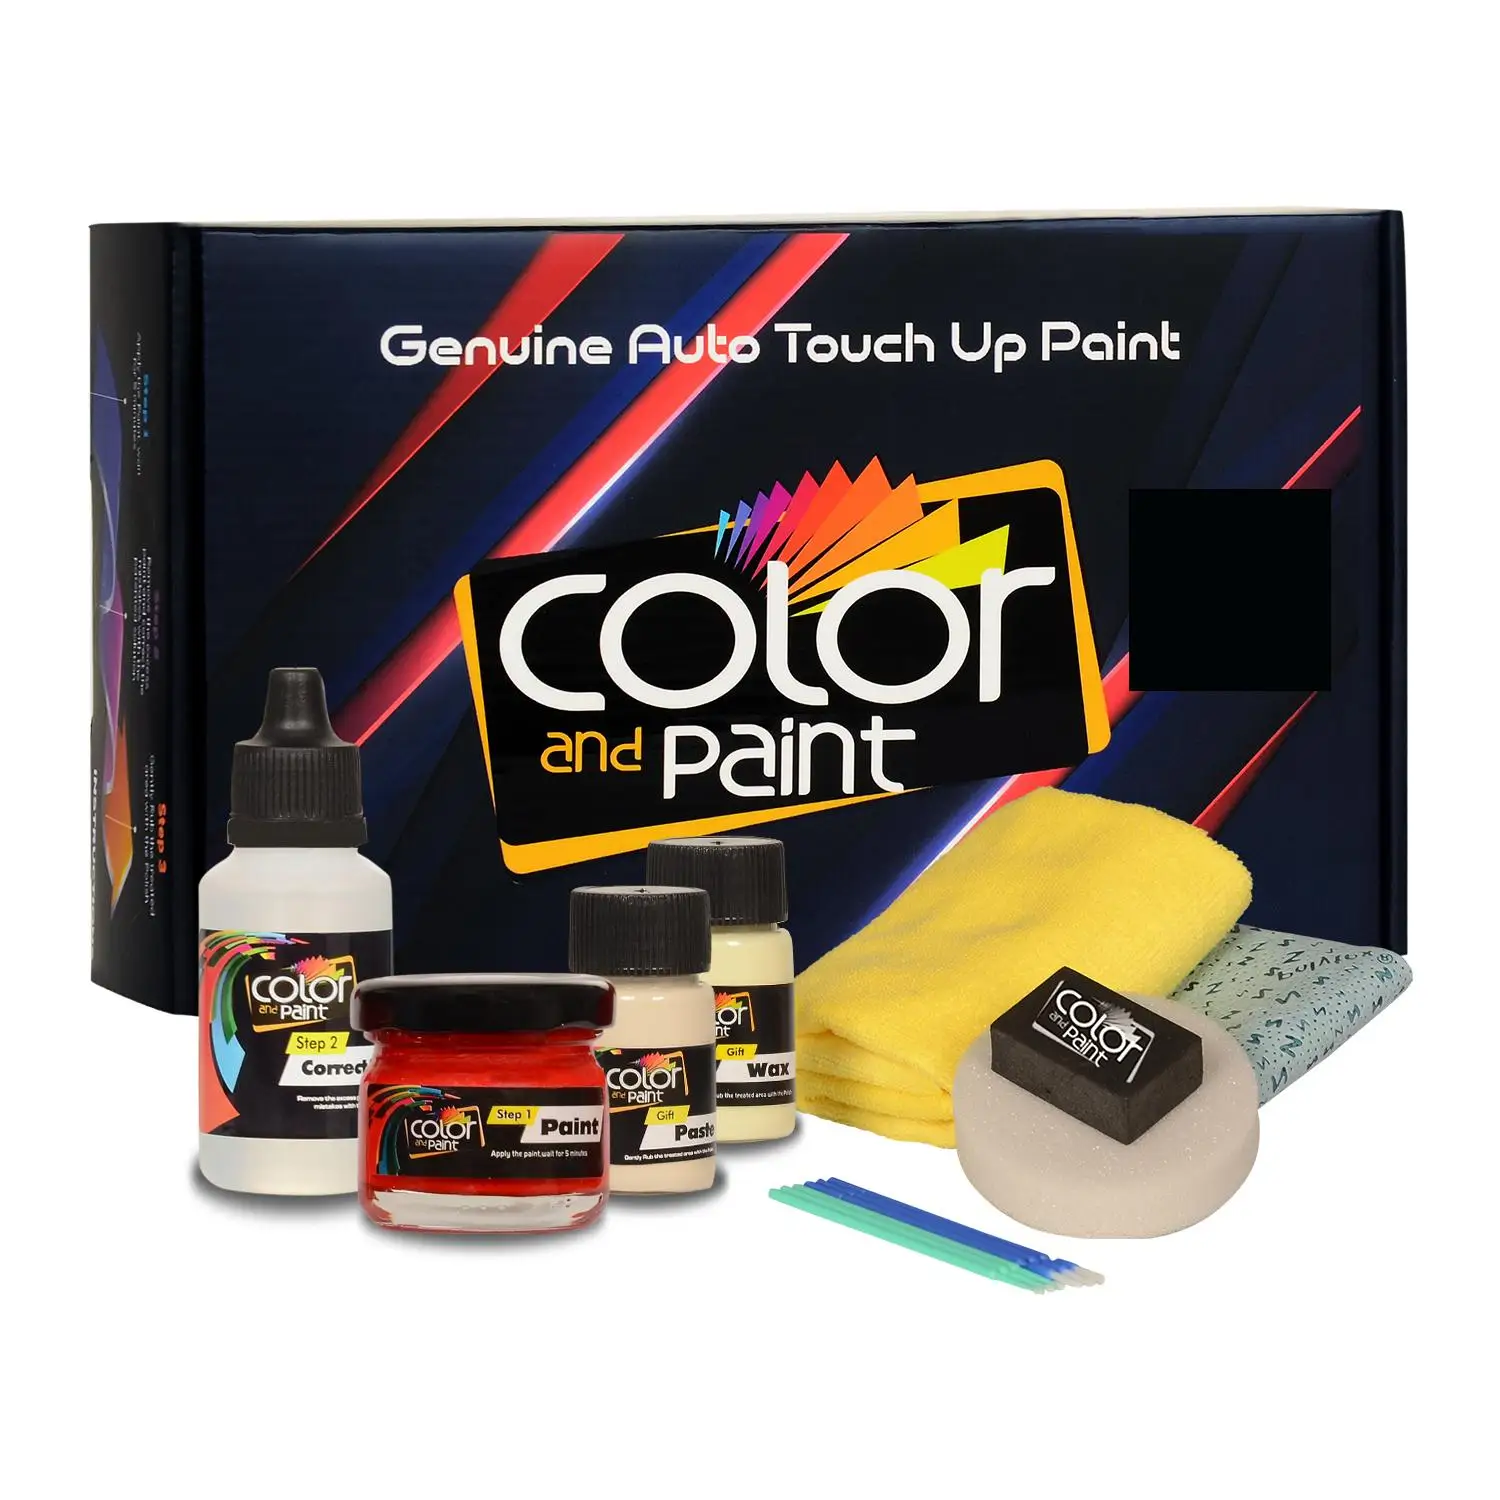 

Color and Paint compatible with Honda Automotive Touch Up Paint - NOBLE GREEN PEARL - G508P-15 - Basic Care